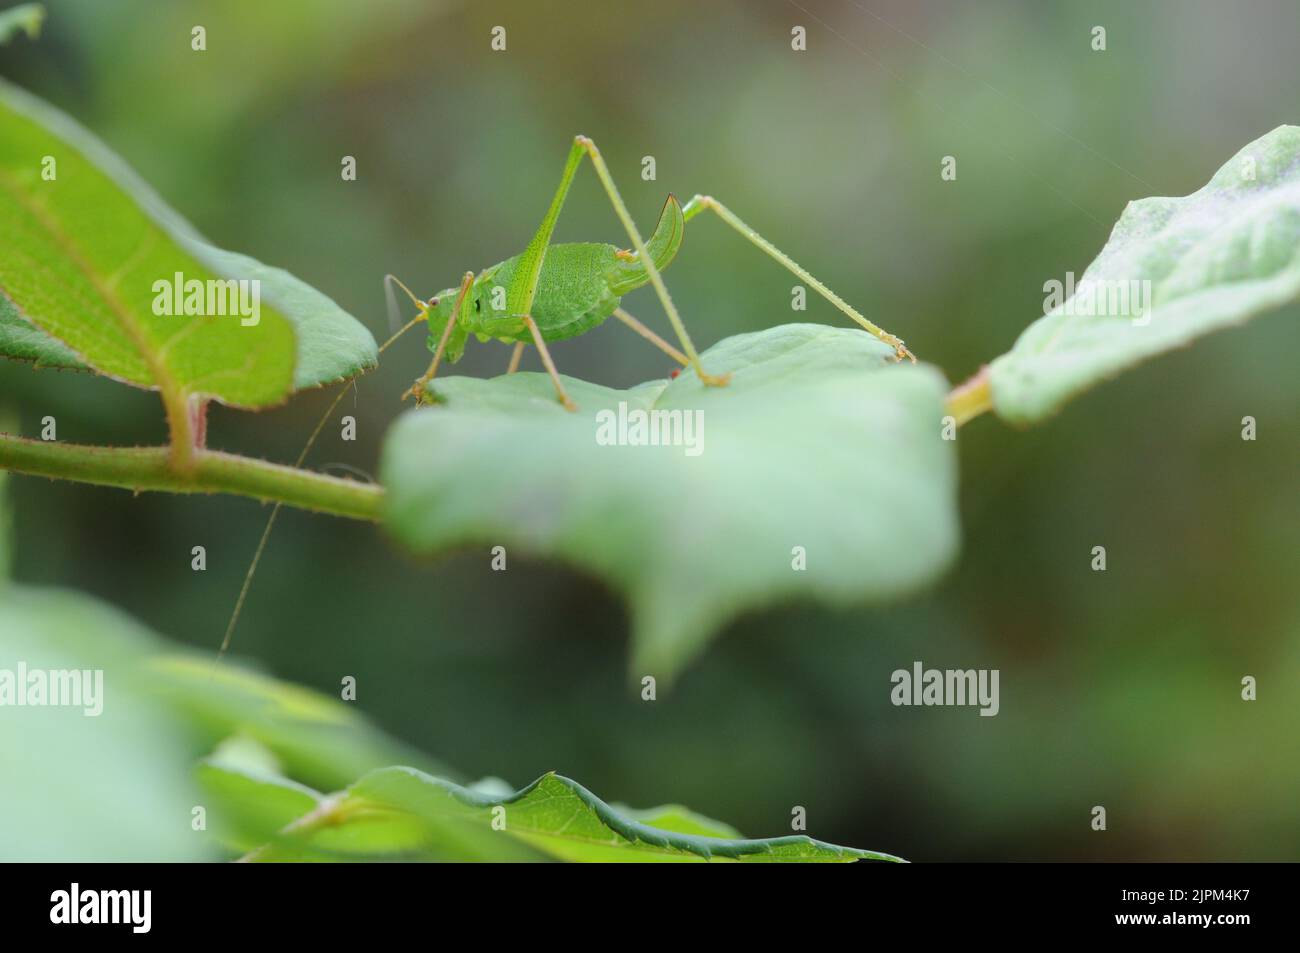 Macro photo of a Green Cricket. Bright Green Colour Insect. Jumping Insect. Stock Photo